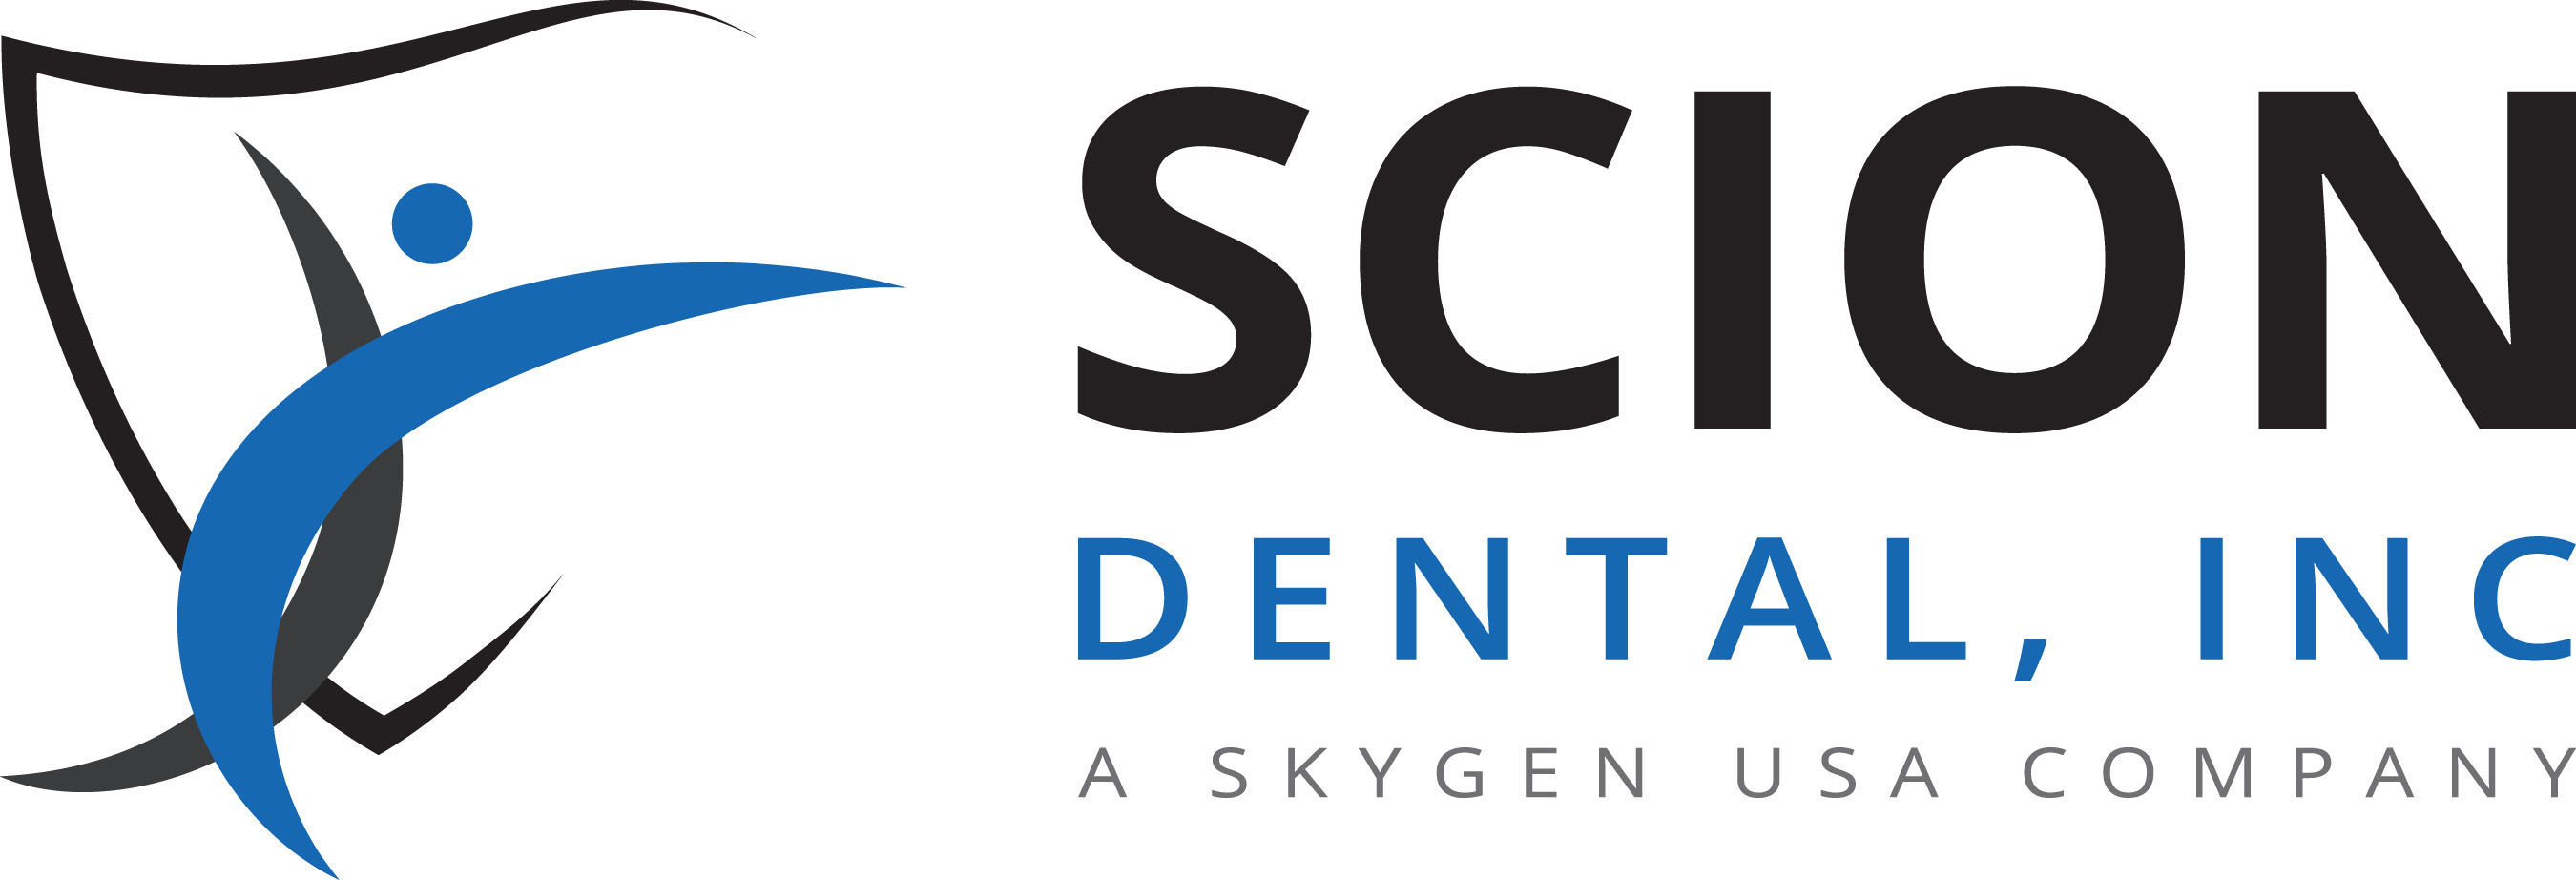 Scion Dental is a distinguished, world-class dental administration company focused on bringing next-generation claims management and technology solutions together for government and commercial payers that enable them to improve efficiencies, achieve compliance, and dramatically reduce the cost of delivering dental benefits. Because of dedicated workflows focused on preventing fraud and abuse, millions of people, including America's children, receive the quality dental care they need.